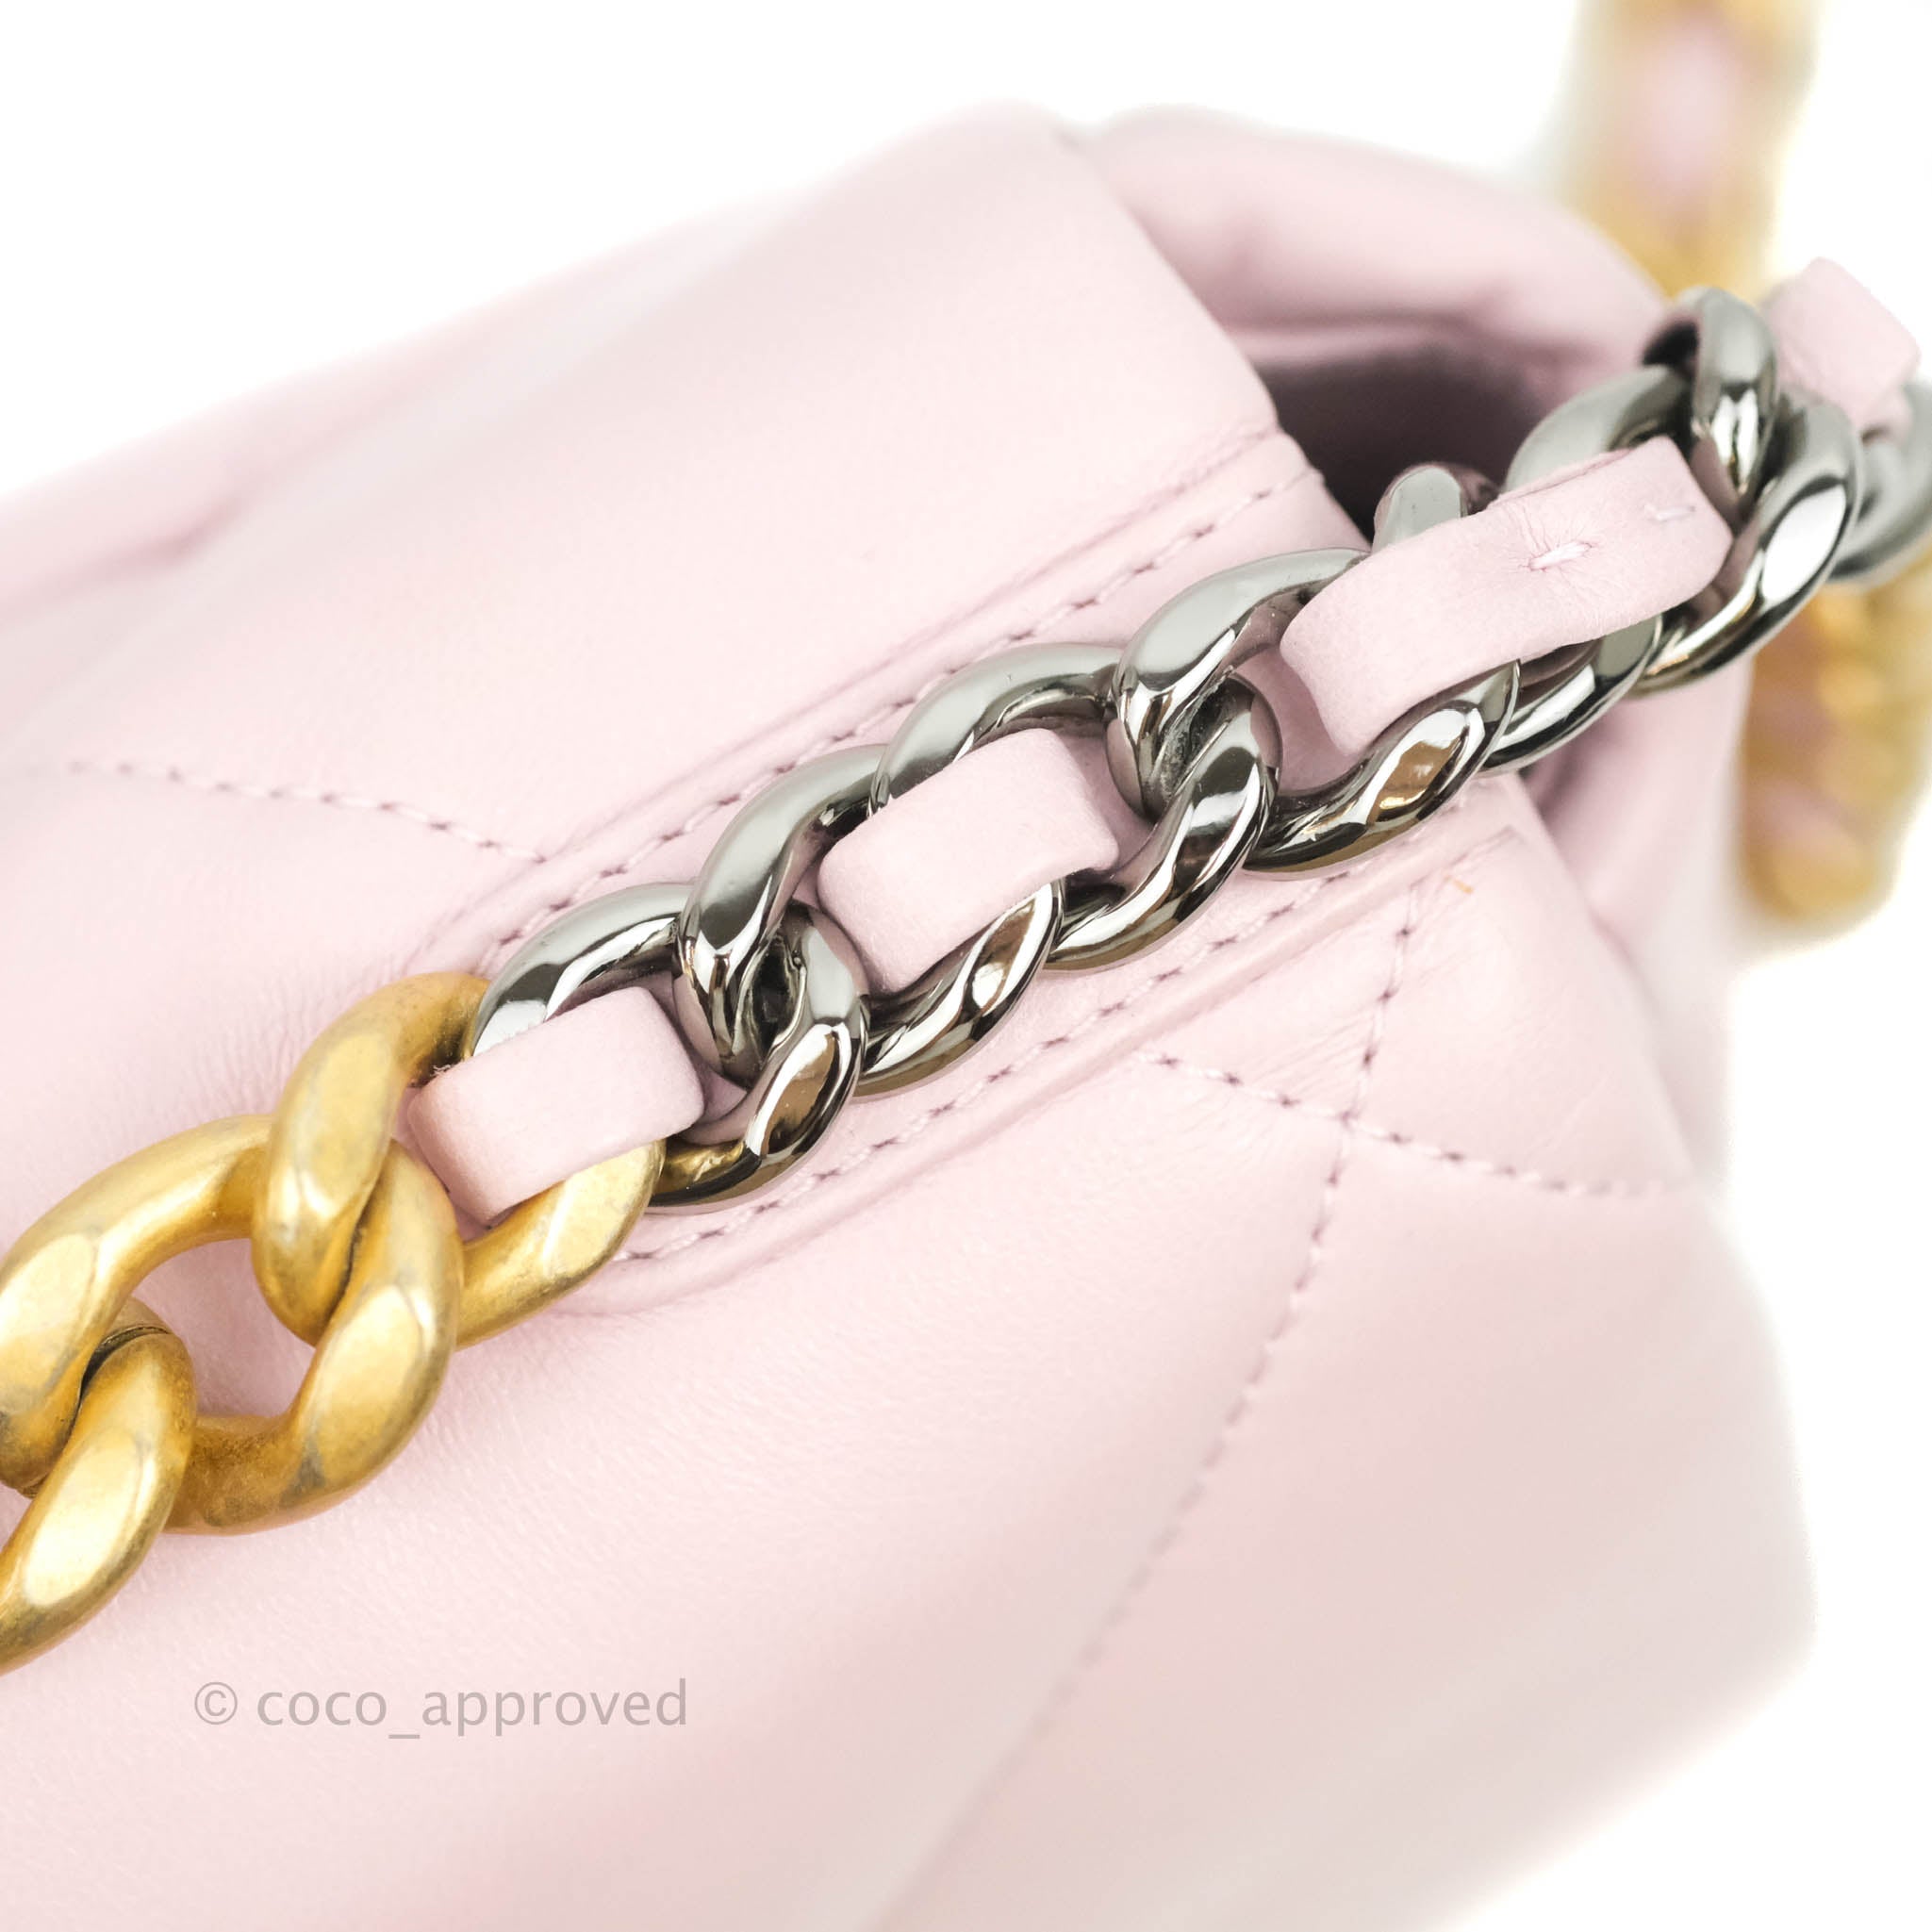 chanel 19 pink